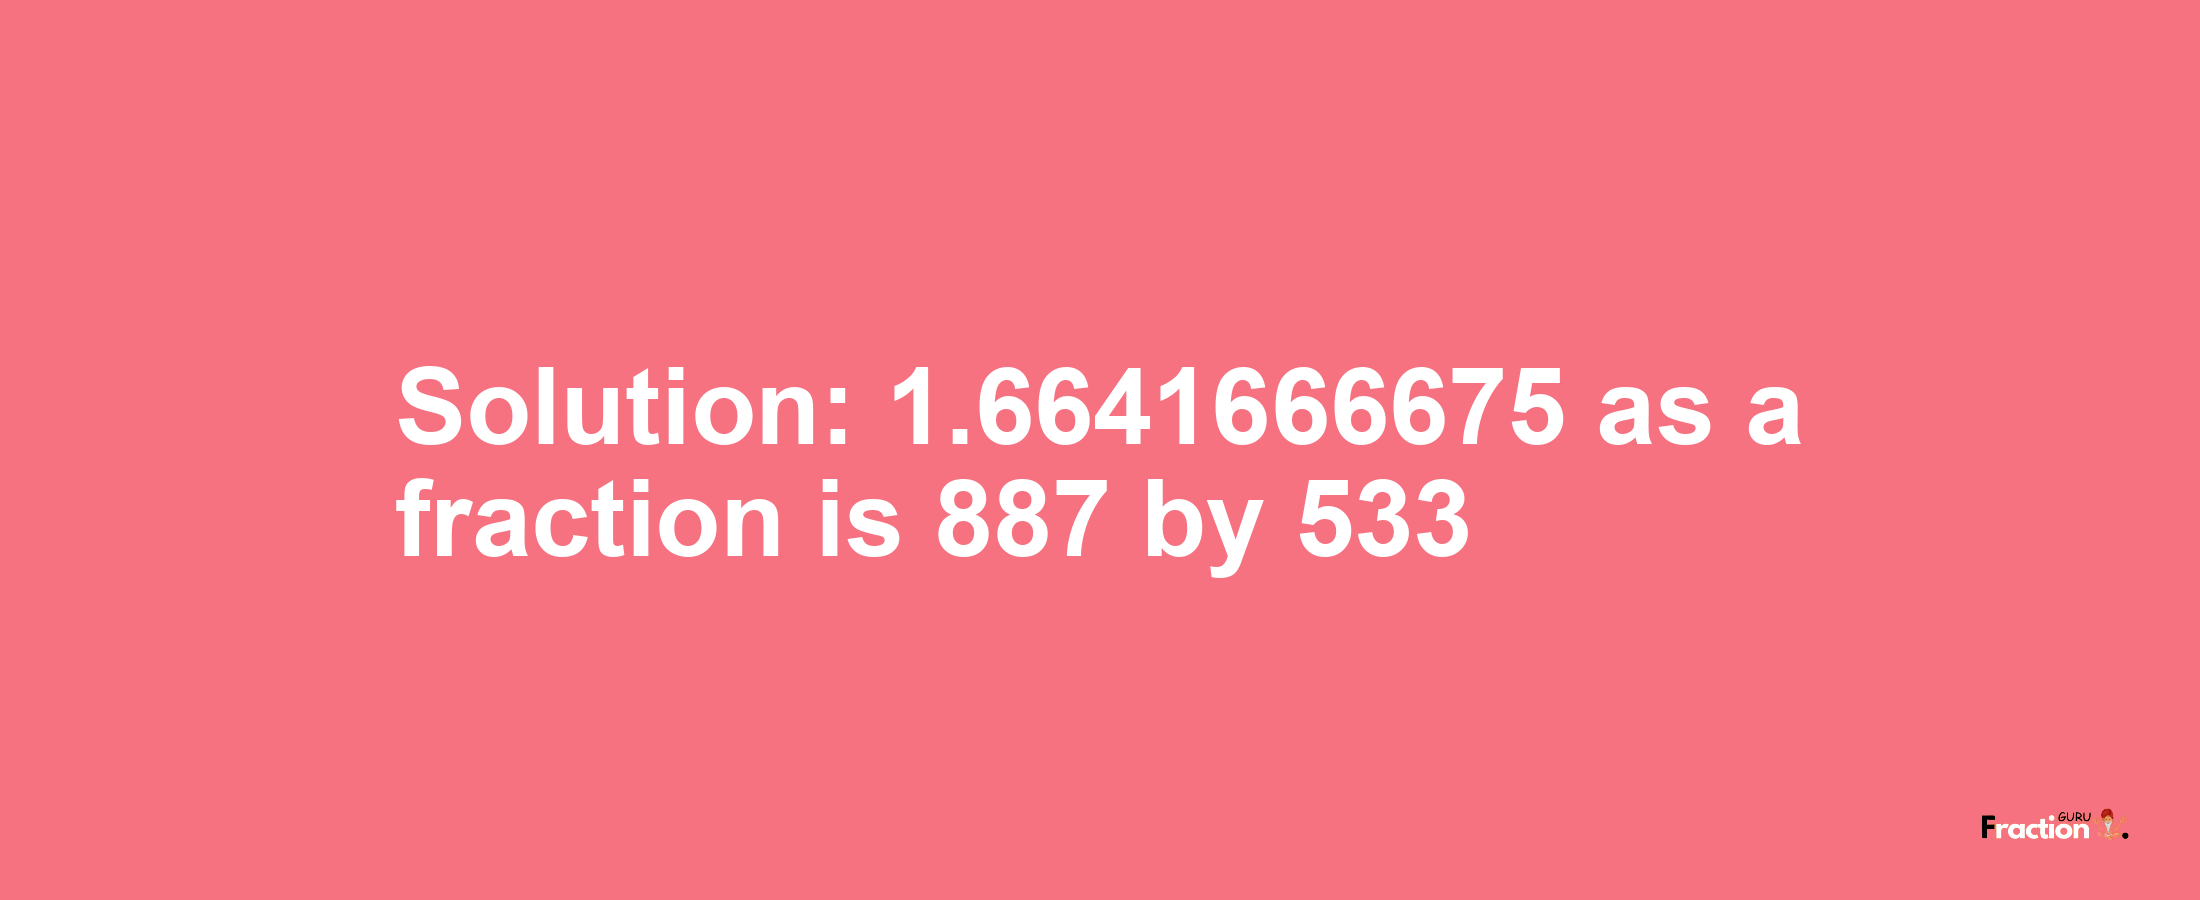 Solution:1.6641666675 as a fraction is 887/533